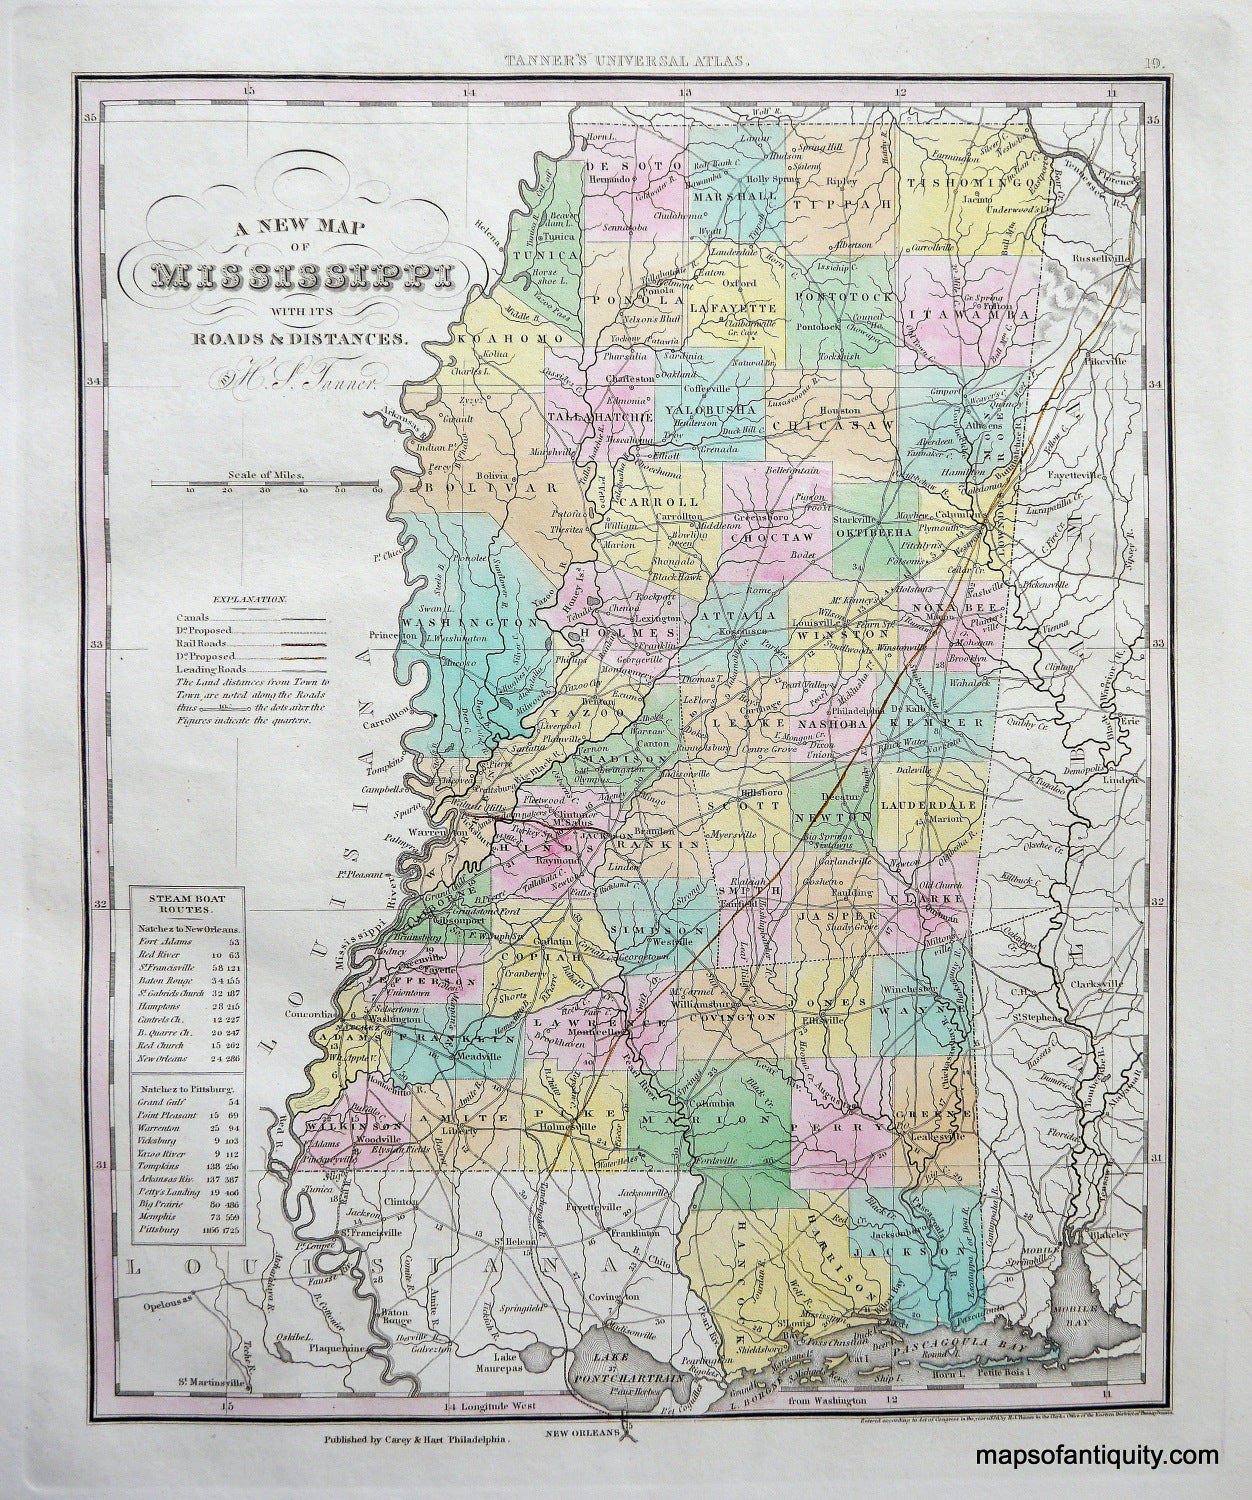 Antique-Hand-Colored-Engraved-Map-A-New-Map-of-Mississippi-with-its-Roads-and-Distances.-United-States-Mississippi-c.-1840-Tanner-Maps-Of-Antiquity